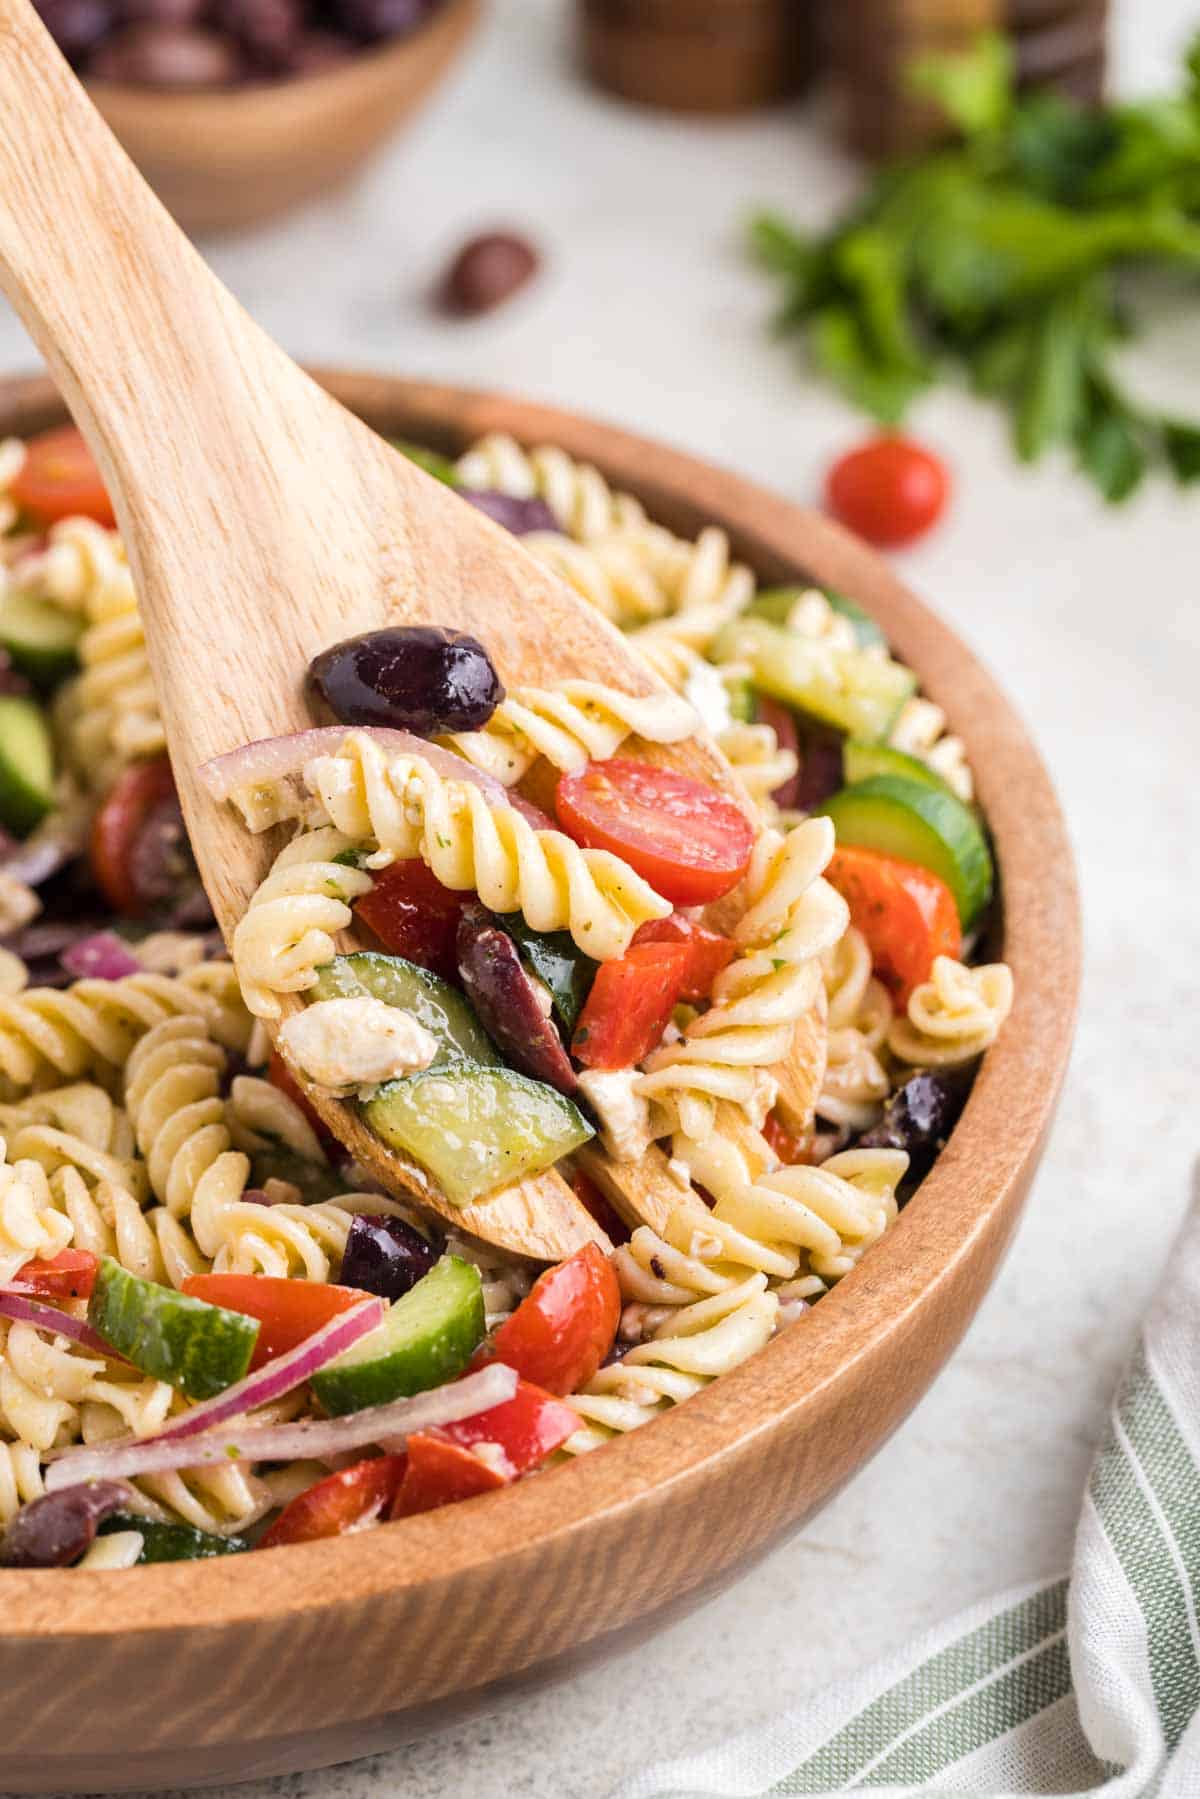 Greek Pasta Salad is a colourful pasta salad recipe loaded with cucumbers, red bell peppers, grape tomatoes, red onions, Kalamata olives and feta cheese all tossed in a homemade dressing.